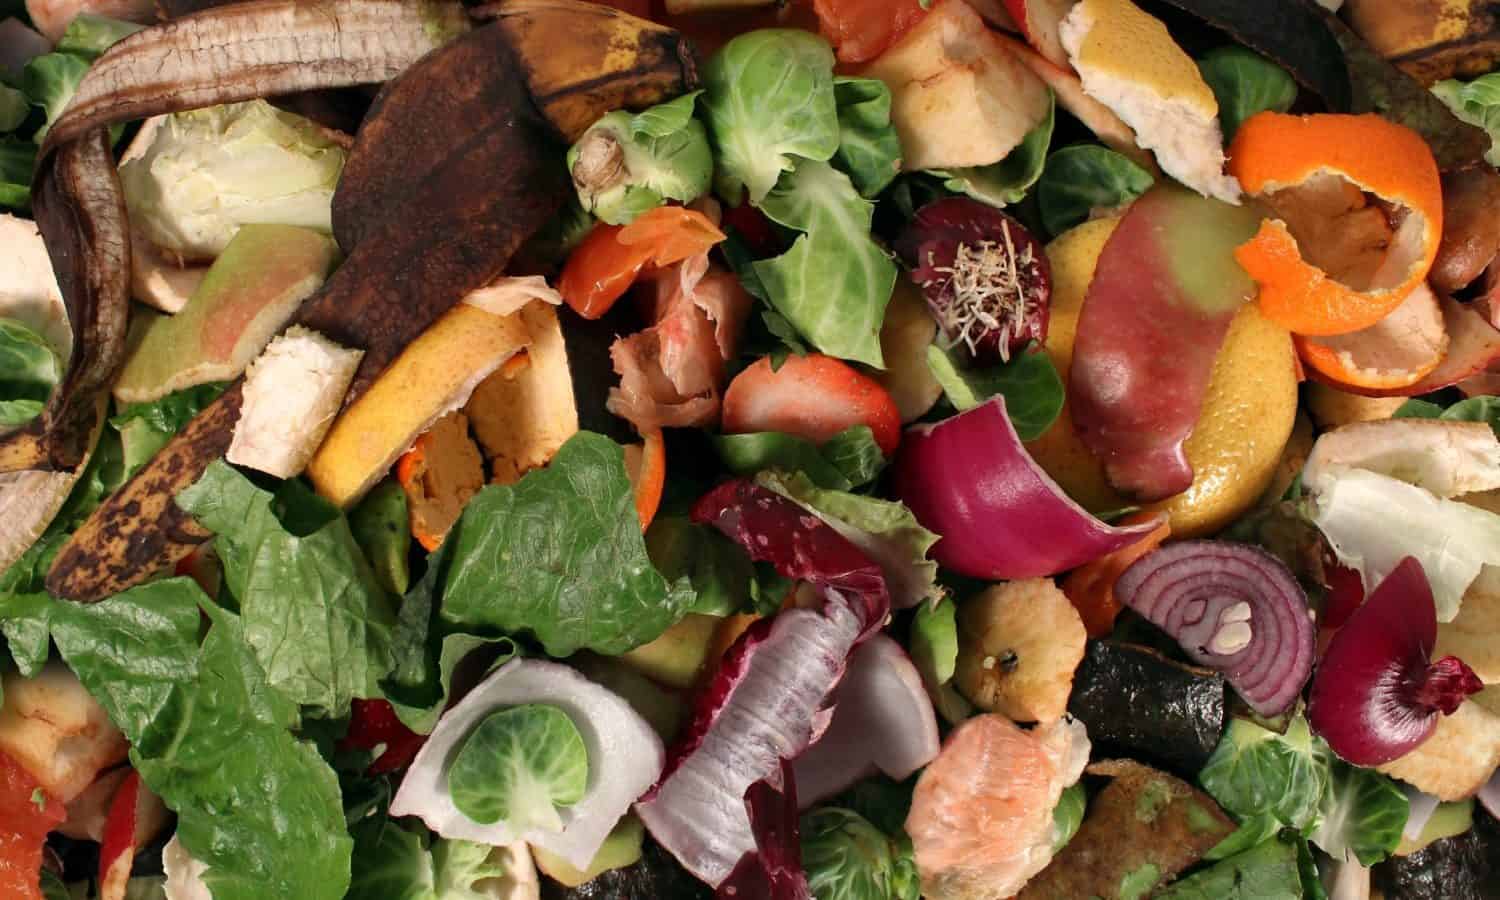 Danielle Nierenberg, president of Food Tank, discusses the issue of food waste and steps being taken to confront it.